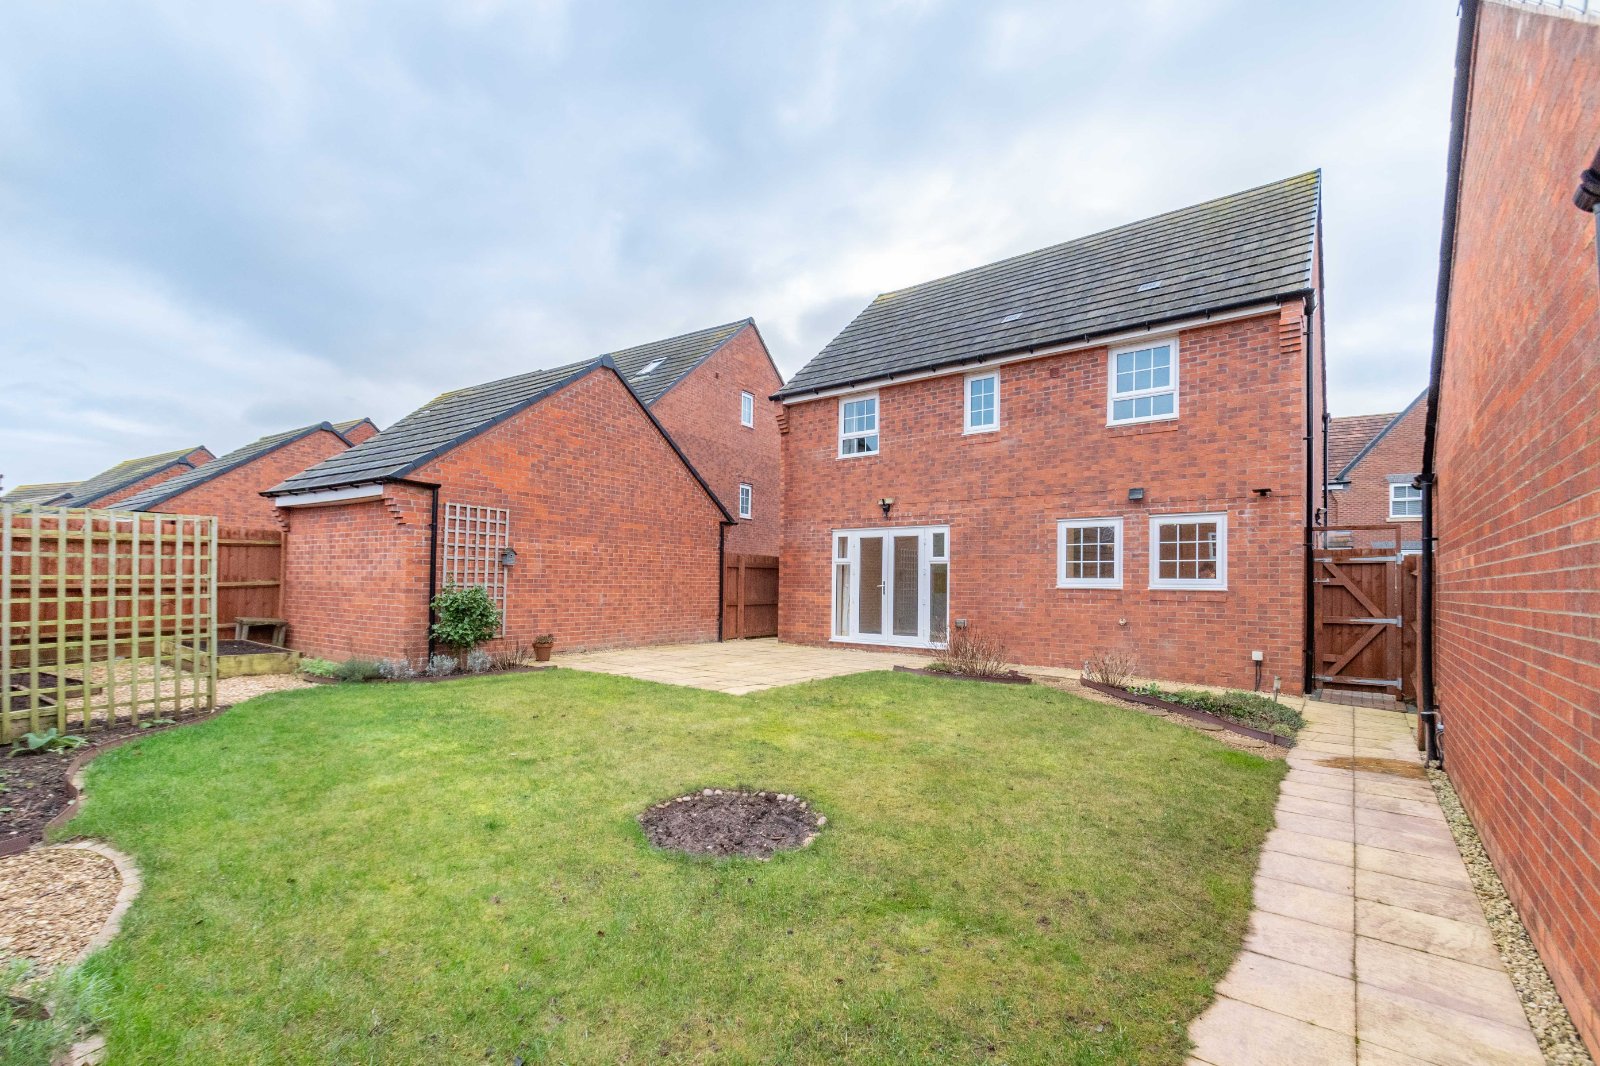 4 bed house for sale in Princethorpe Street, Bromsgrove  - Property Image 13